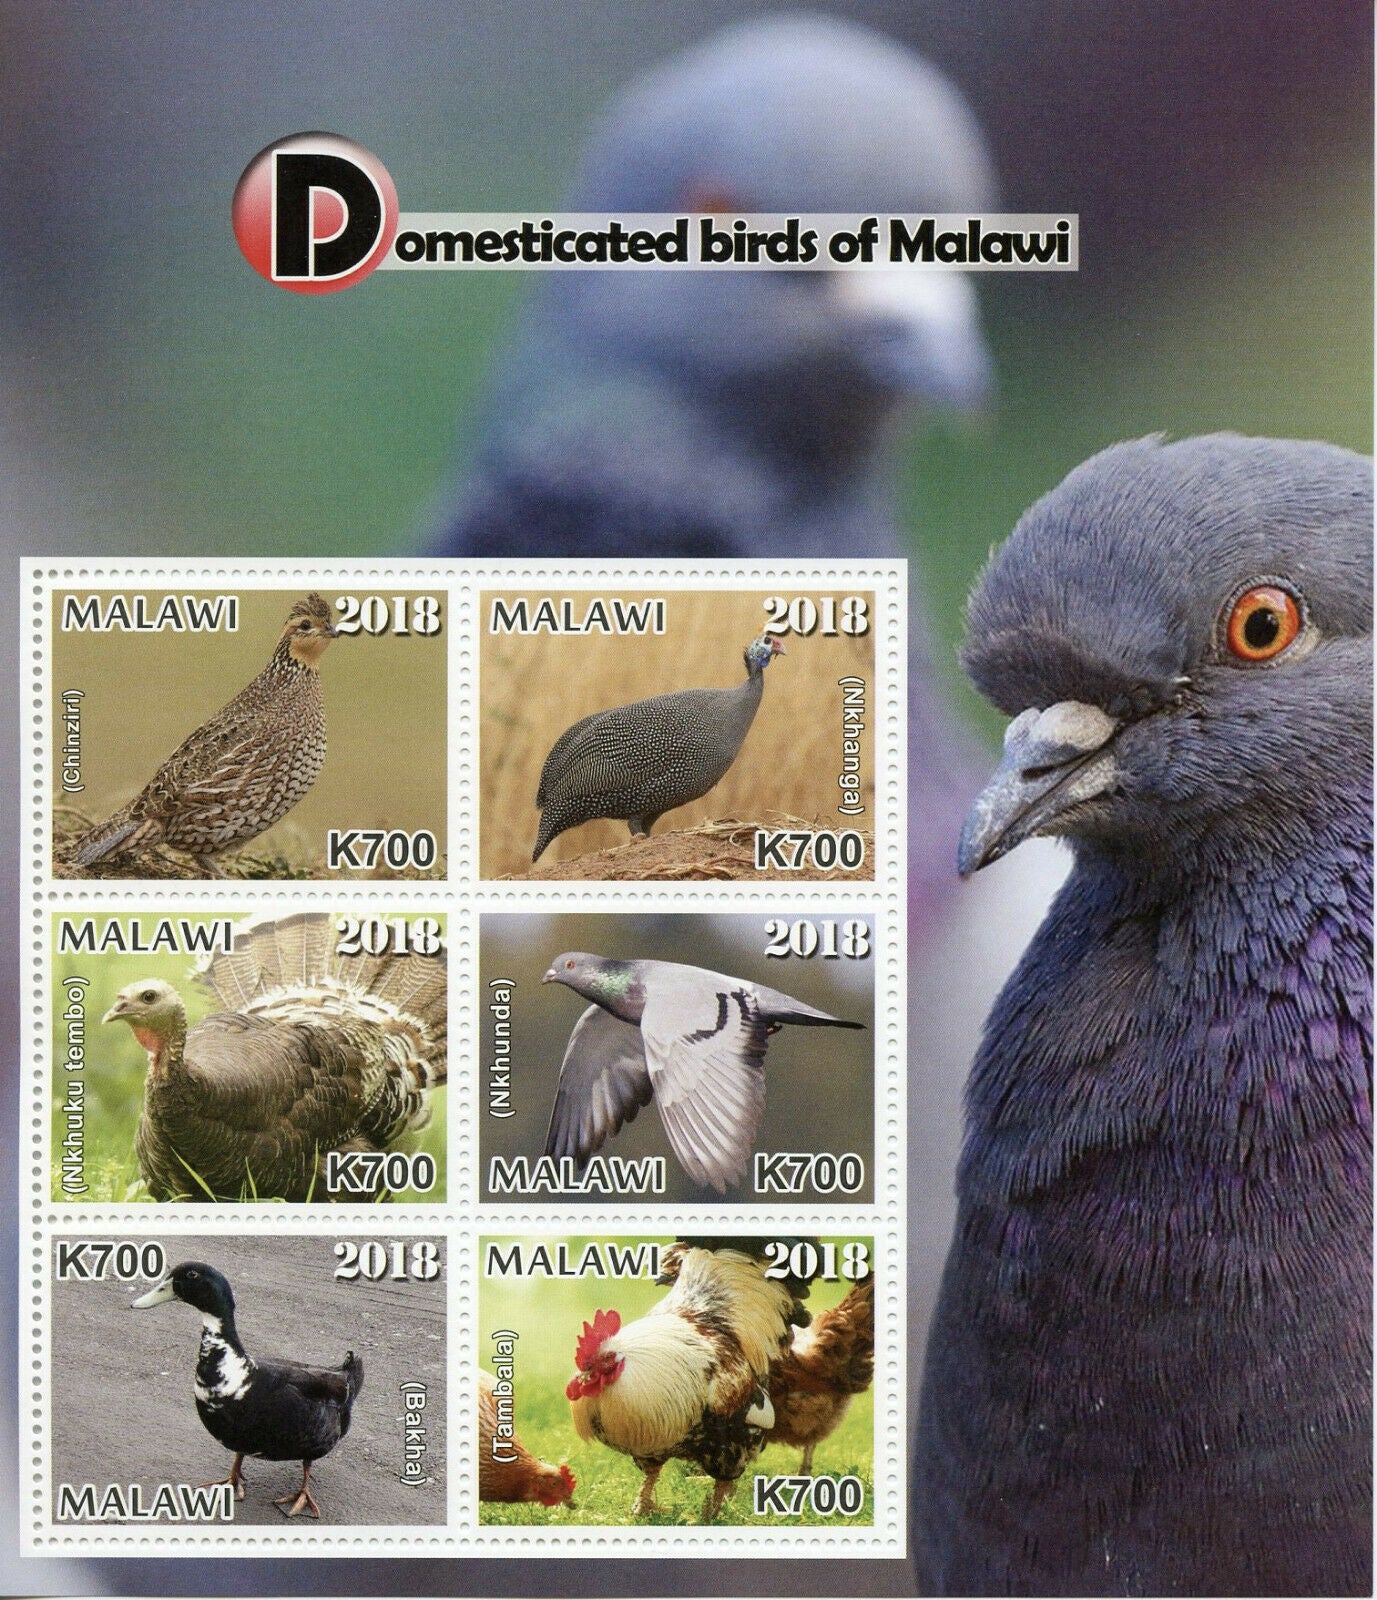 Malawi Domesticated Birds on Stamps 2018 MNH Ducks Pigeons Chickens 6v M/S